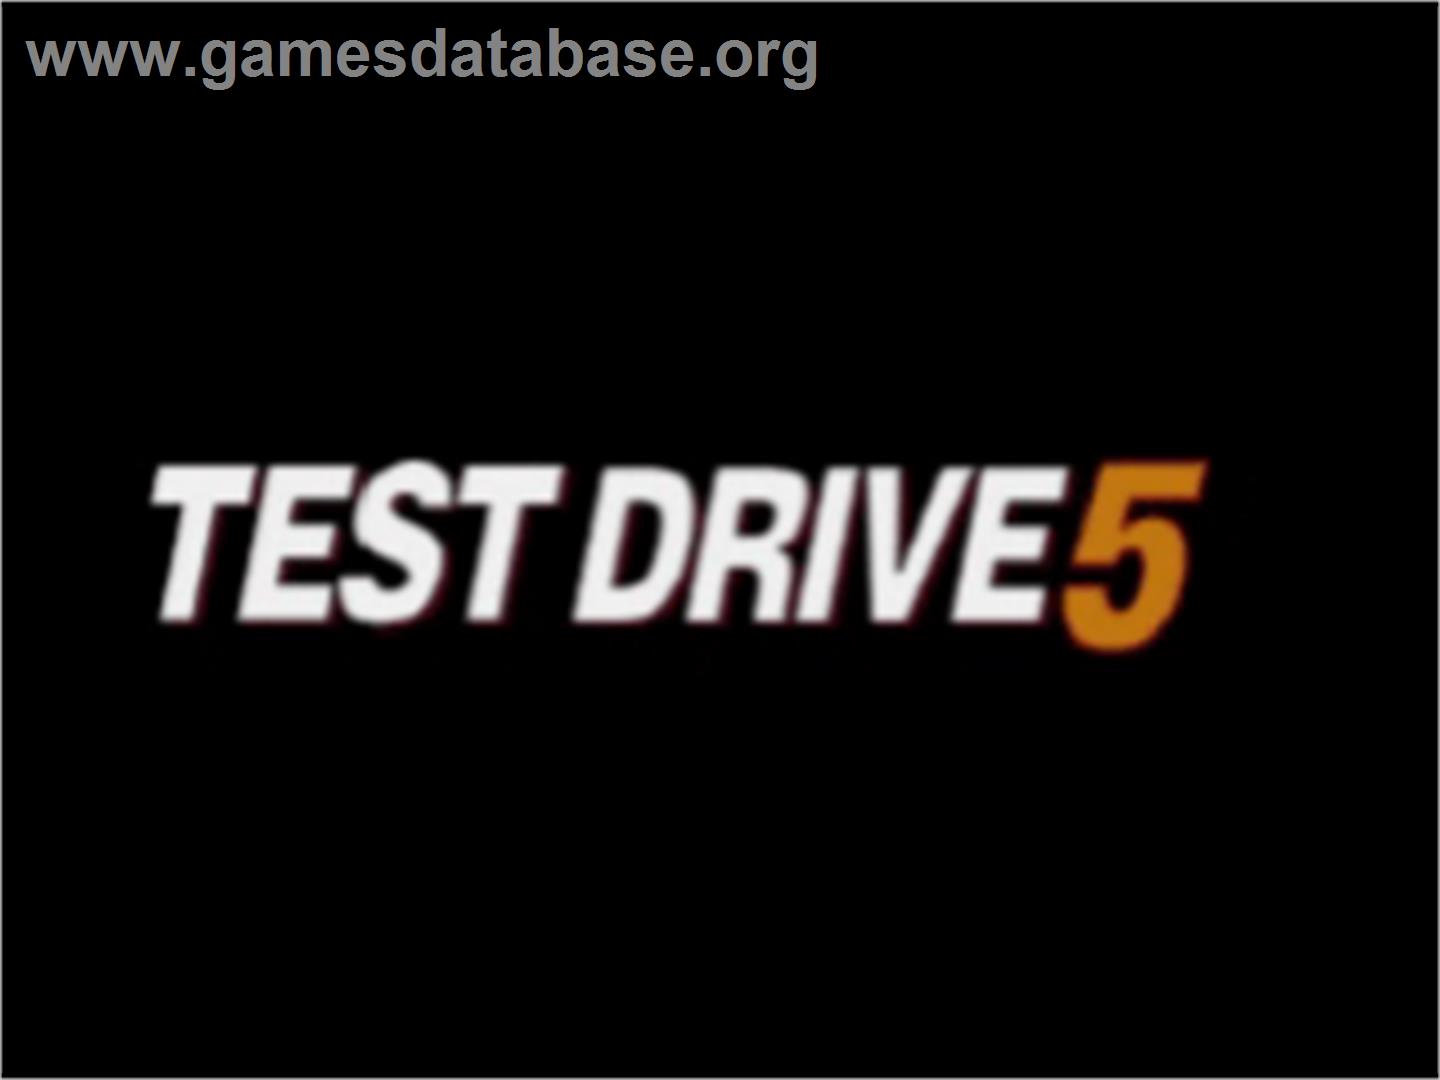 Test Drive 5 - Sony Playstation - Artwork - Title Screen